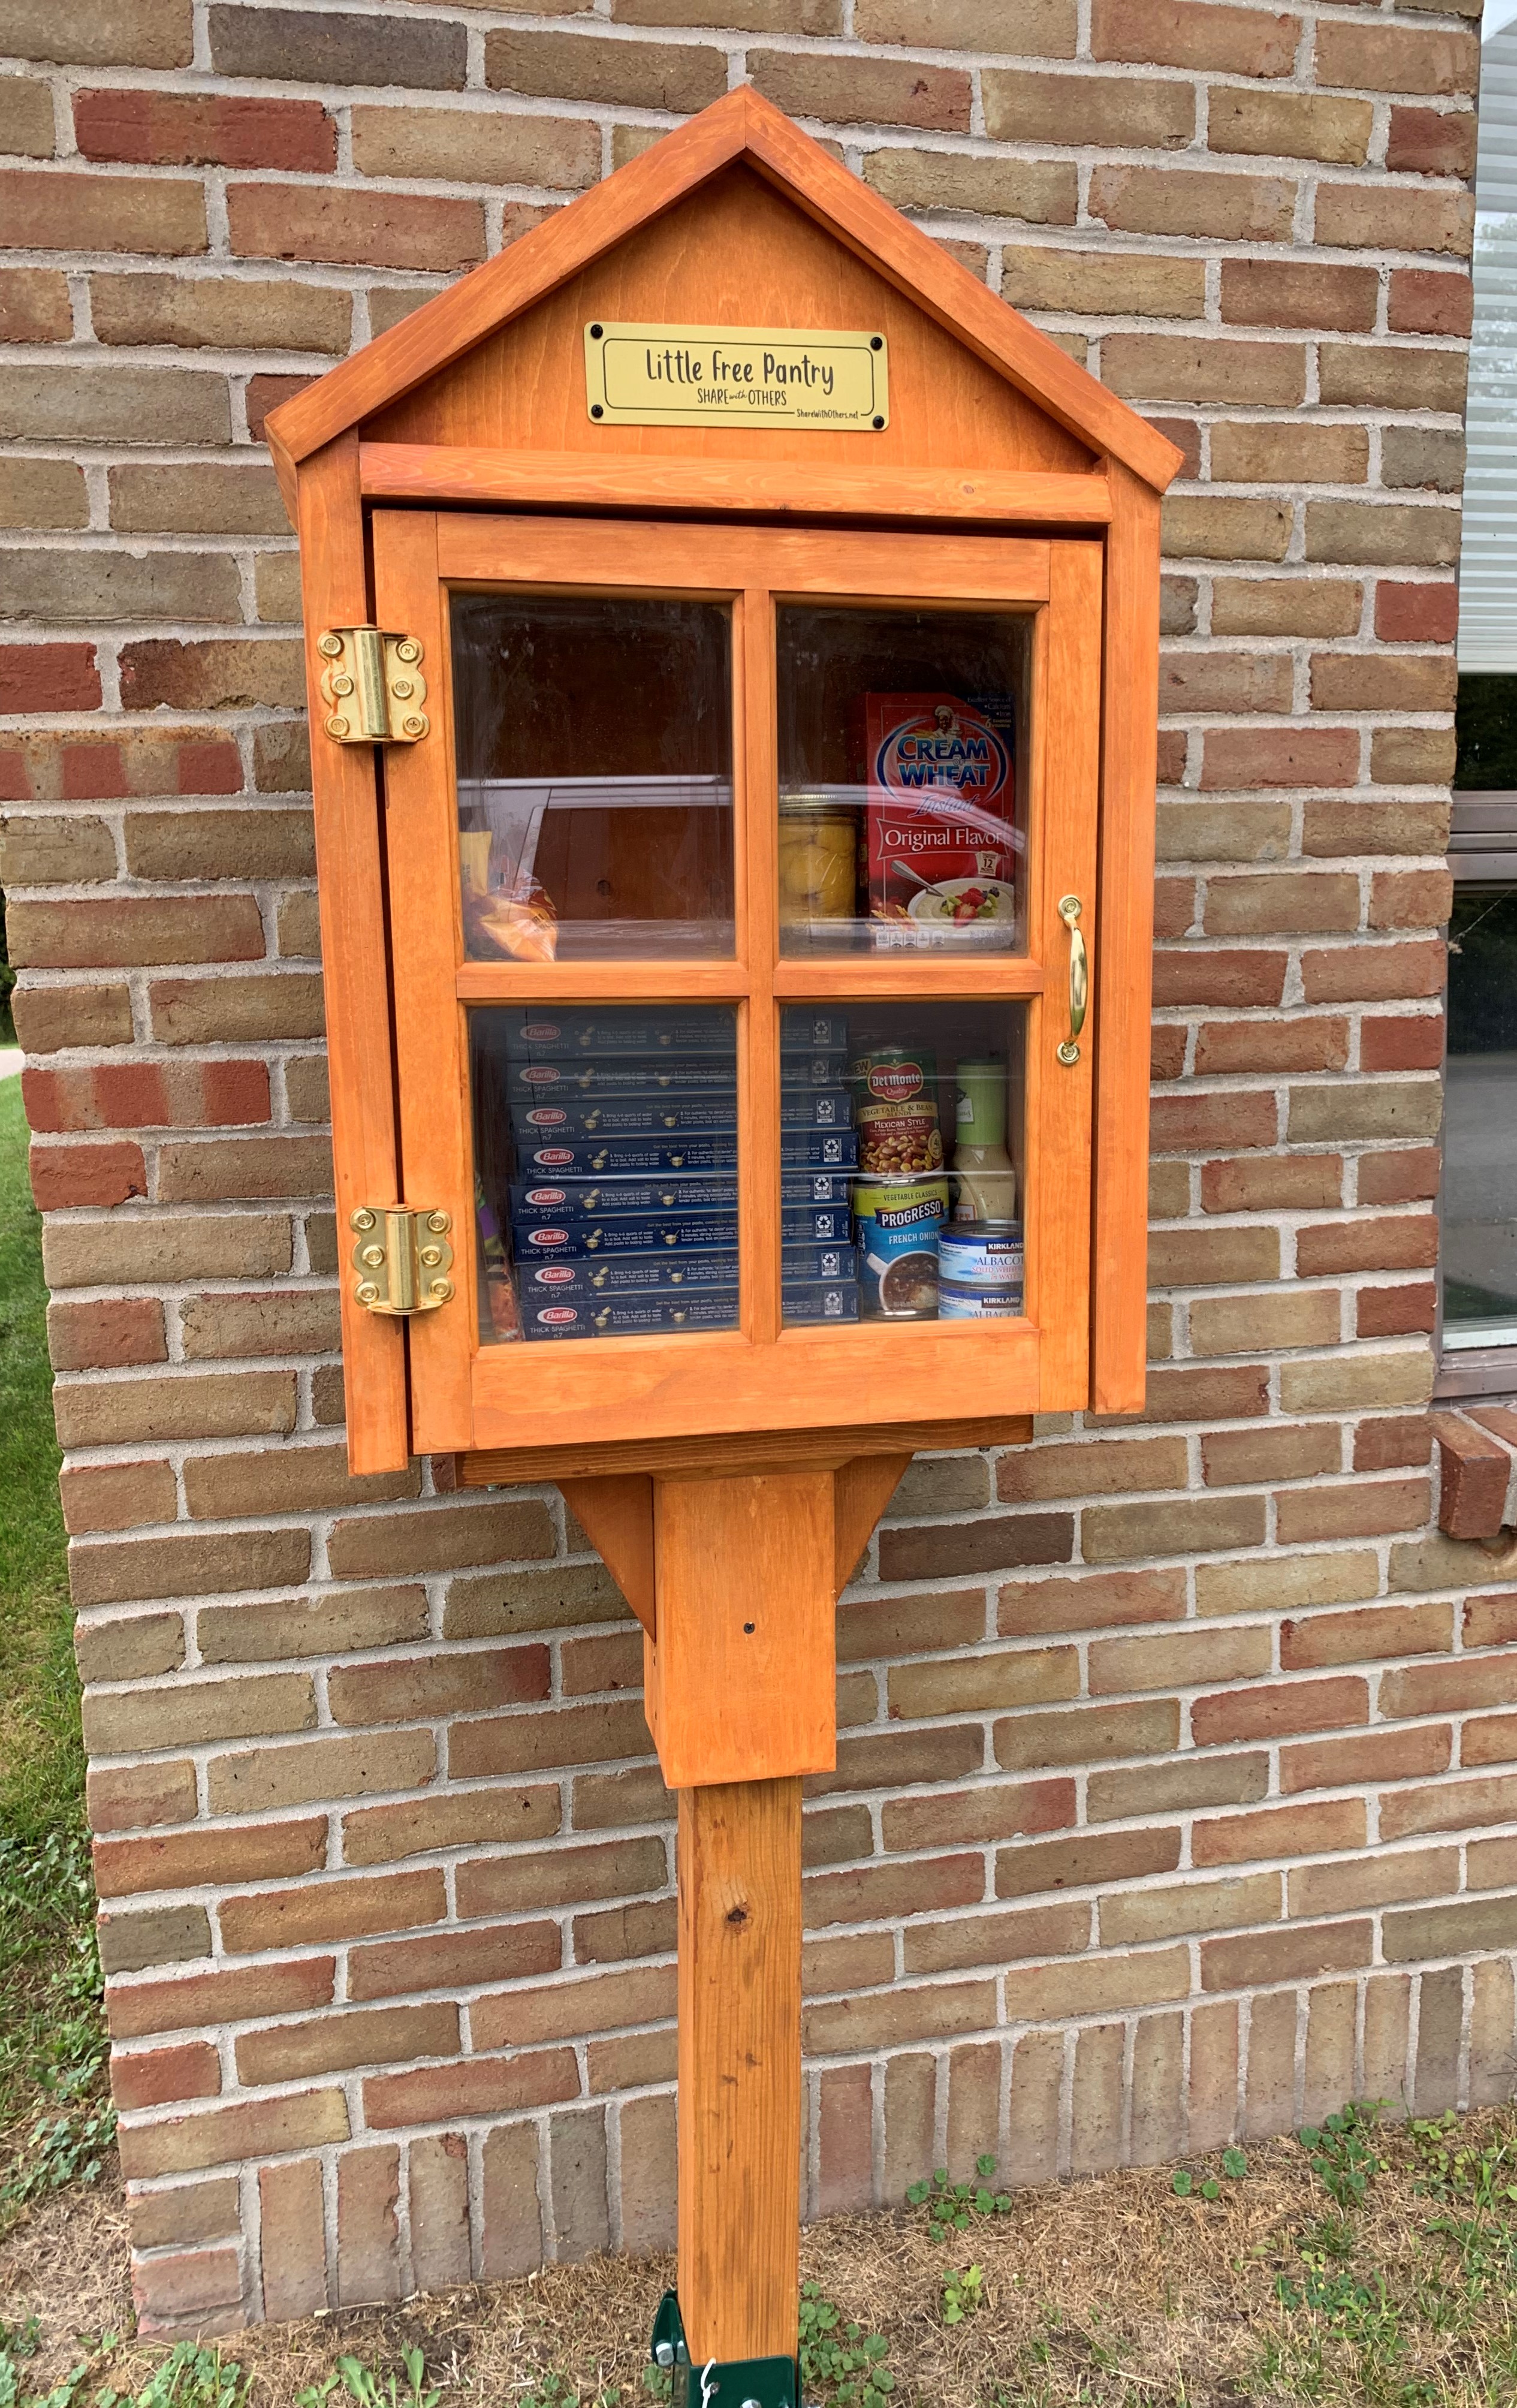 Free Little Pantry Hayes Township Photo 1